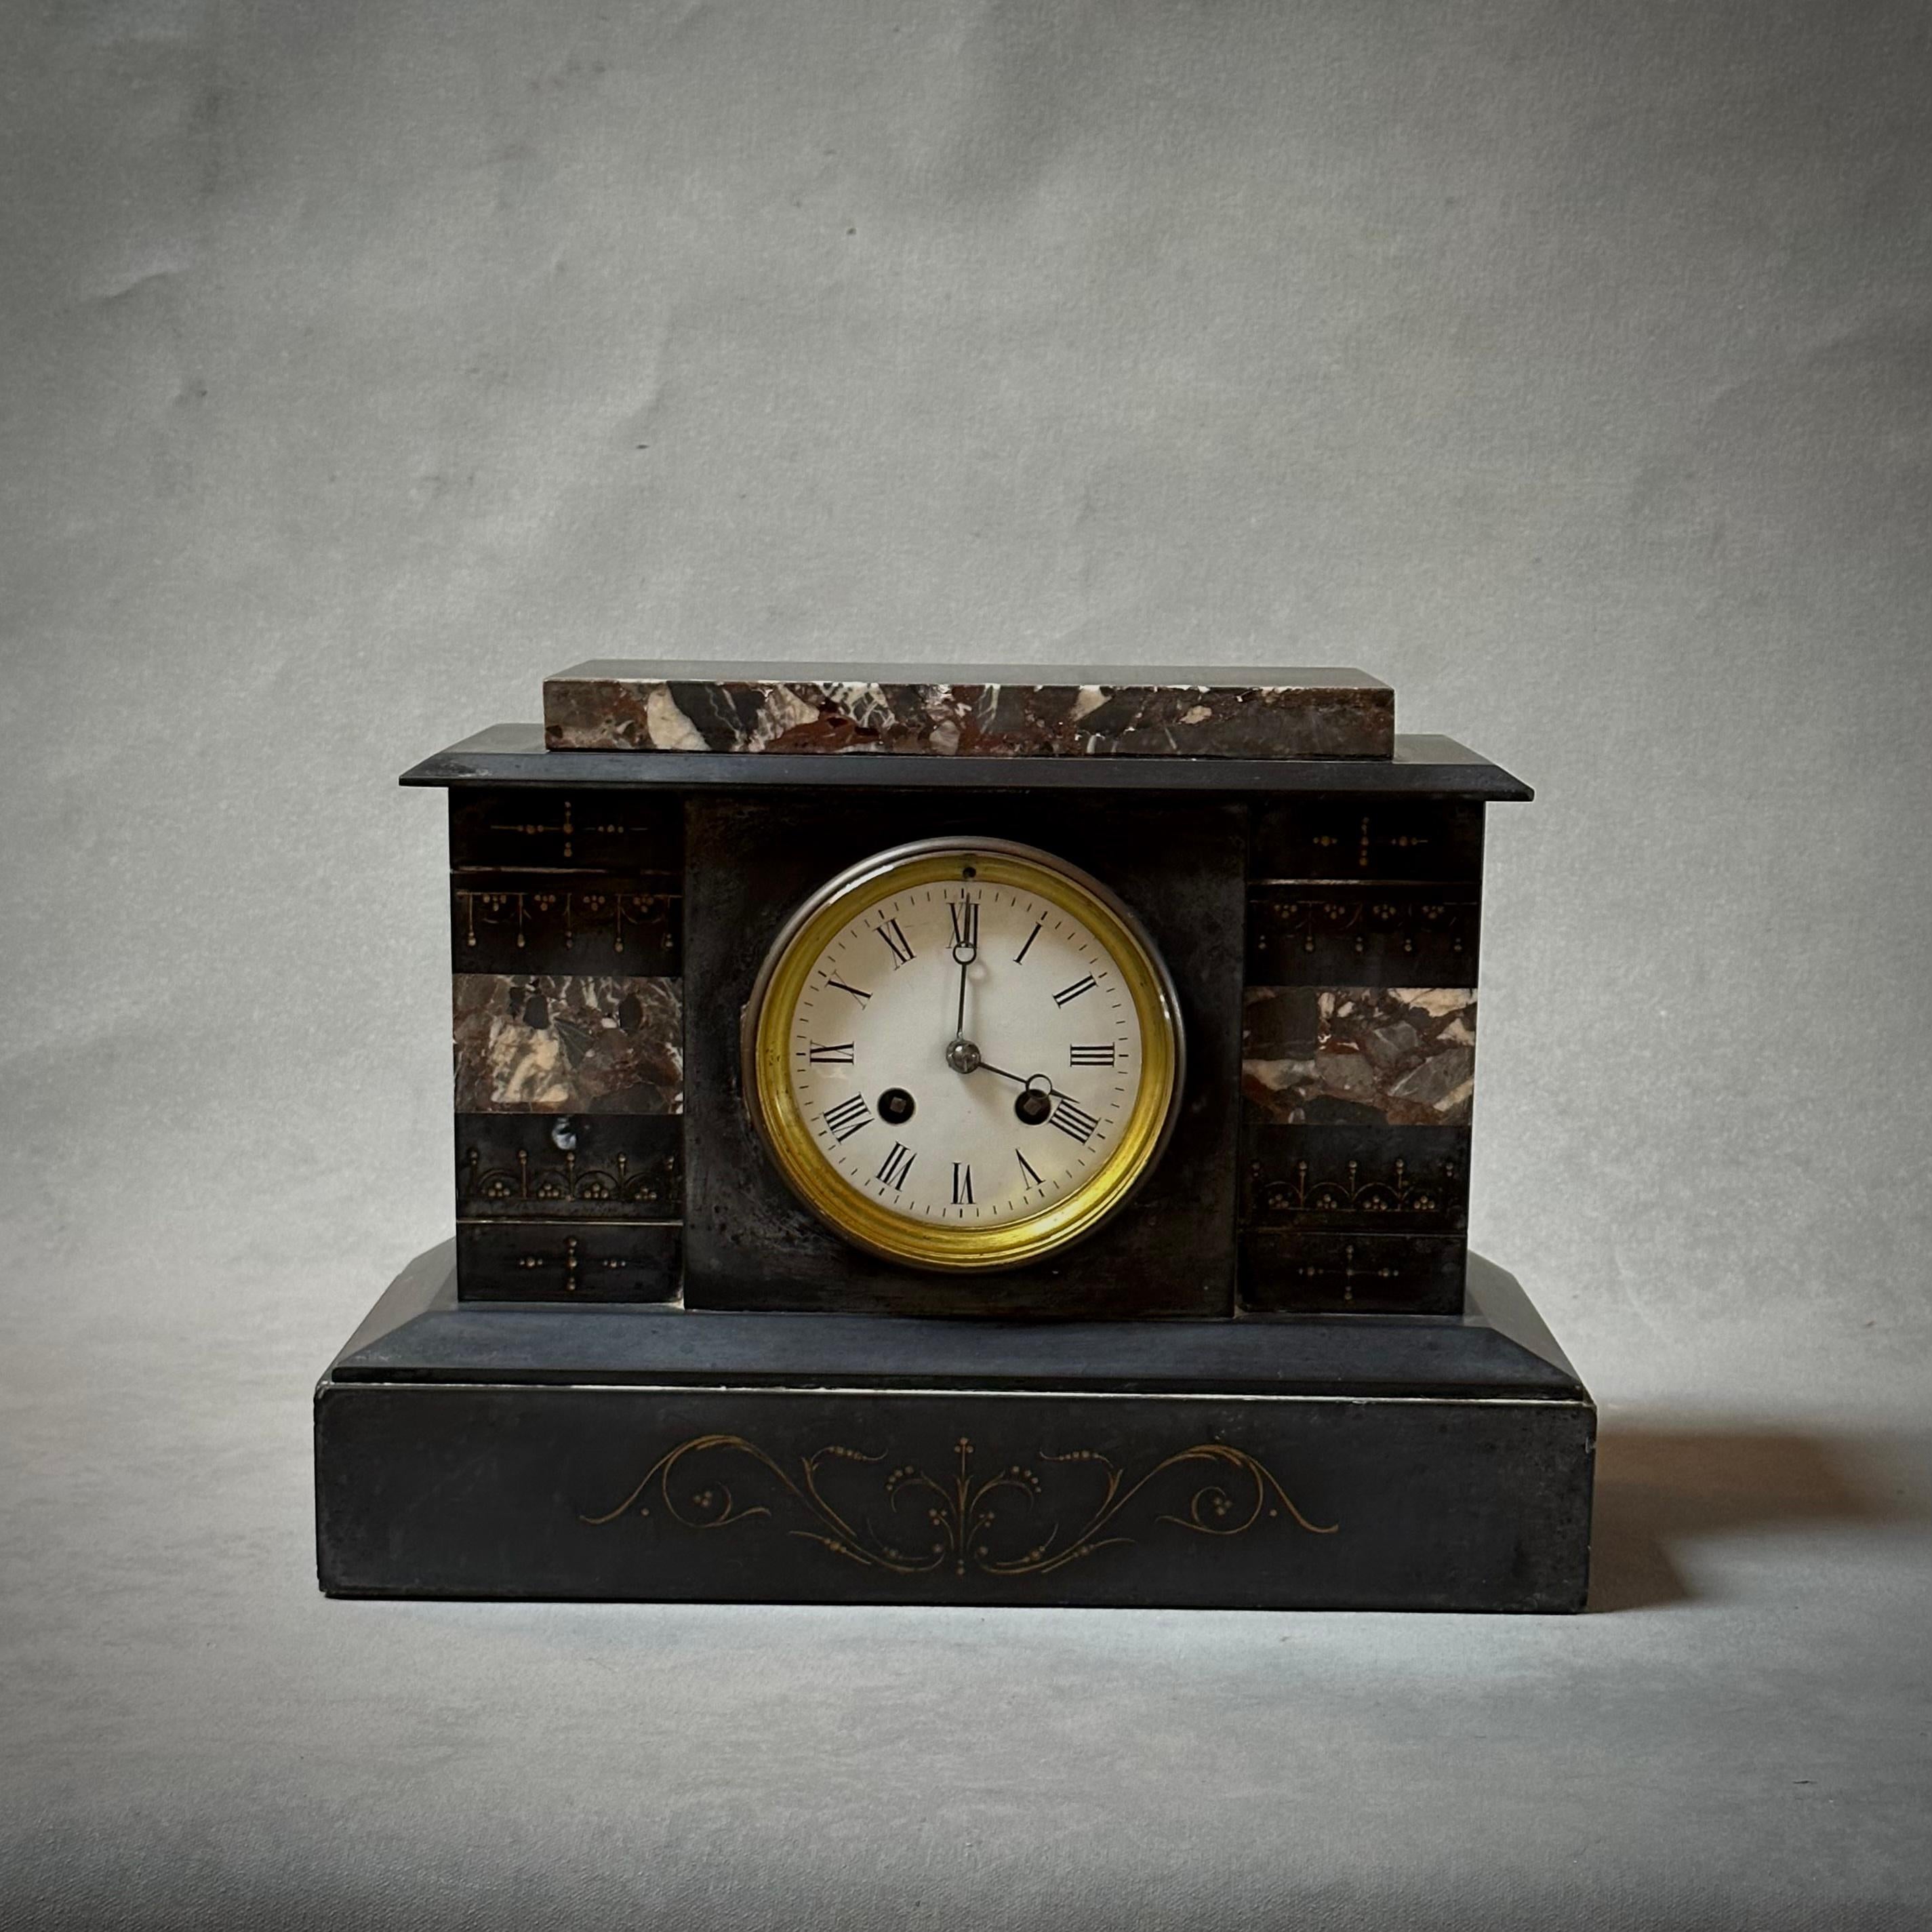 A decorative marble inlaid clock from 1880s France. A beautiful blend of neoclassical and modern elements makes this a uniquely transitional object.

France, circa 1880

Dimensions: 14W x 6D x 10H